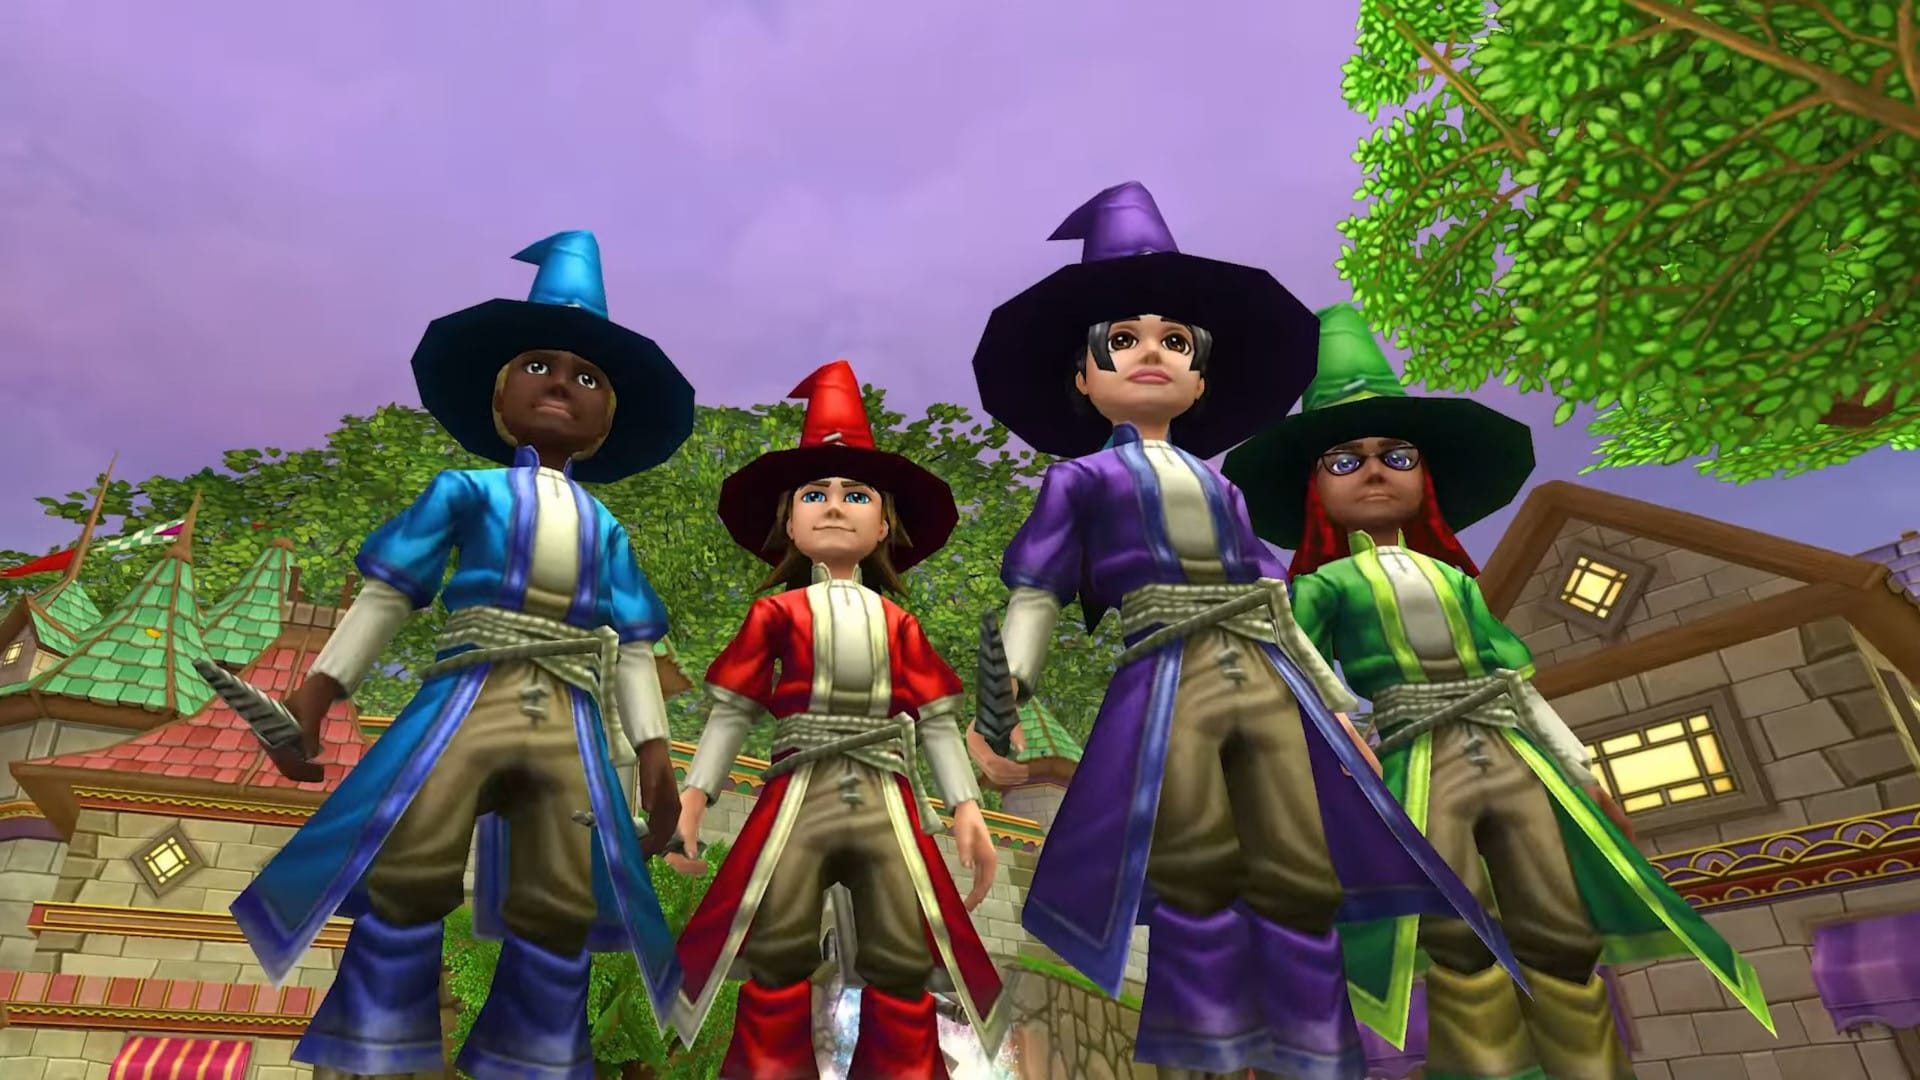 MMO Wizard101 Trolled By Strange Employee Server Messages